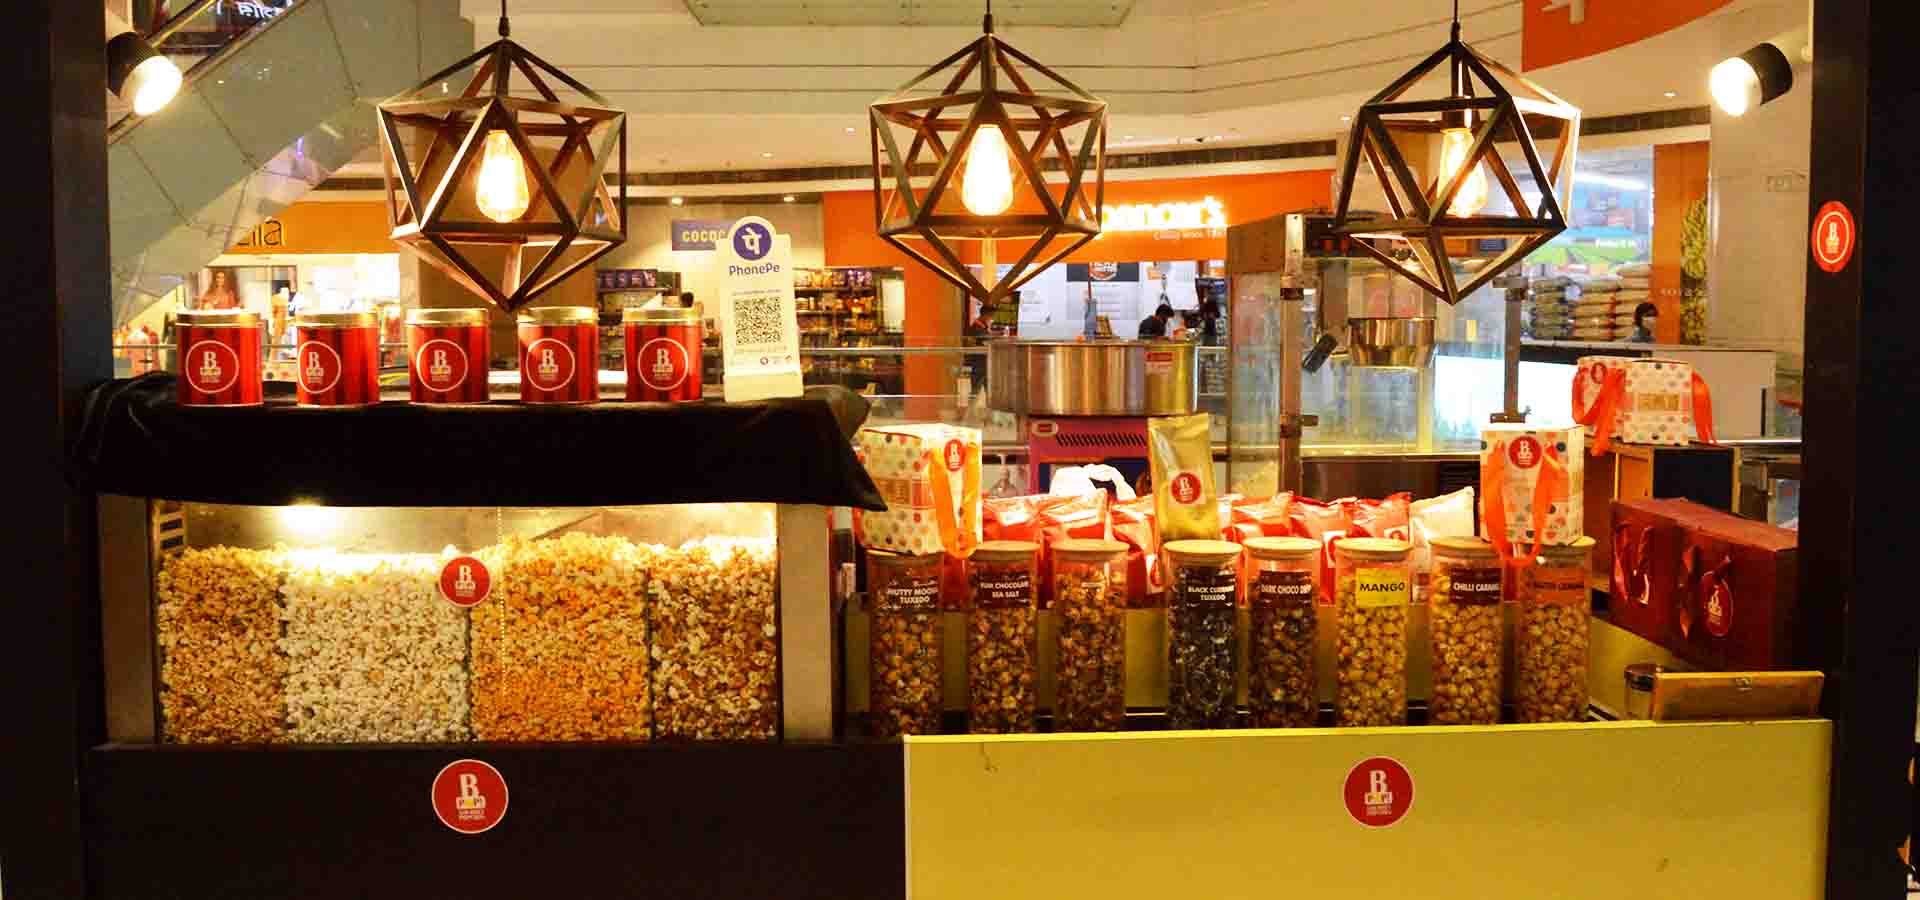 Batcaves Gourmet Popcorn store photos in mall